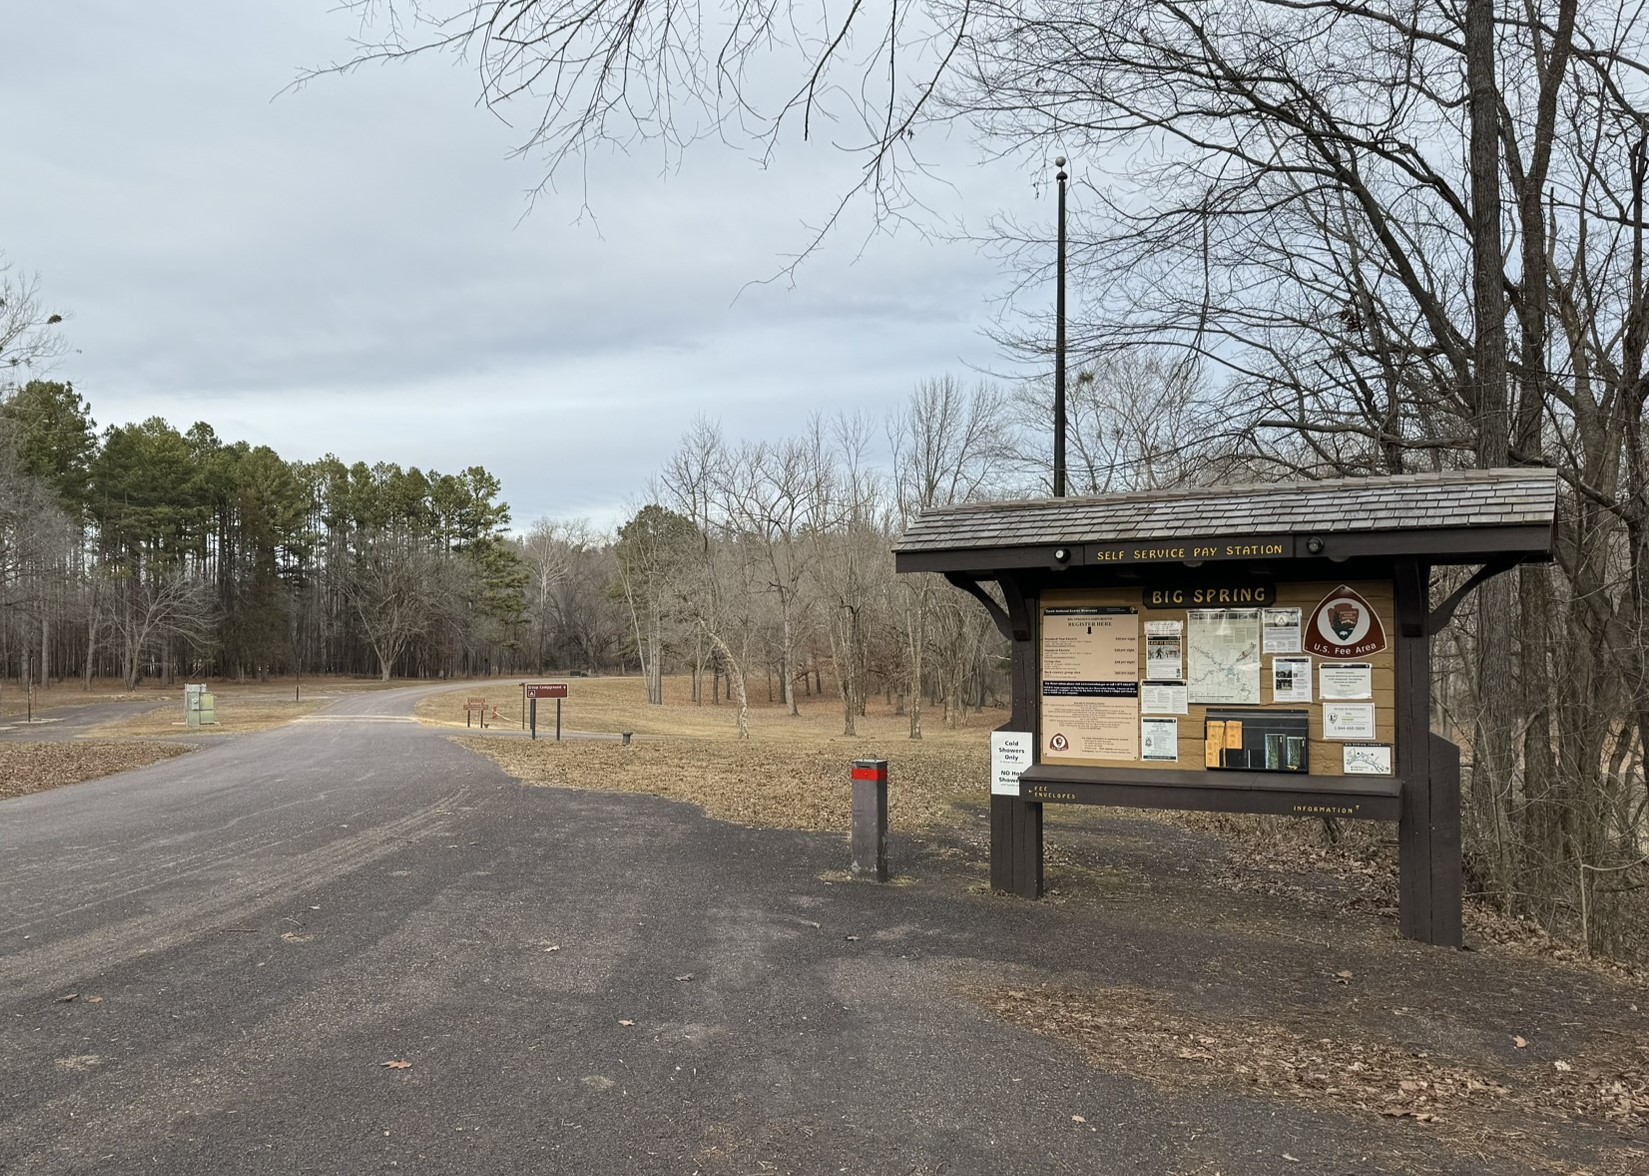 A park bulletin board covered with literature, sign says self service pay station, Big Spring. Asphault campground and other signs can be seen in distance. Pine trees are lining the roadway.